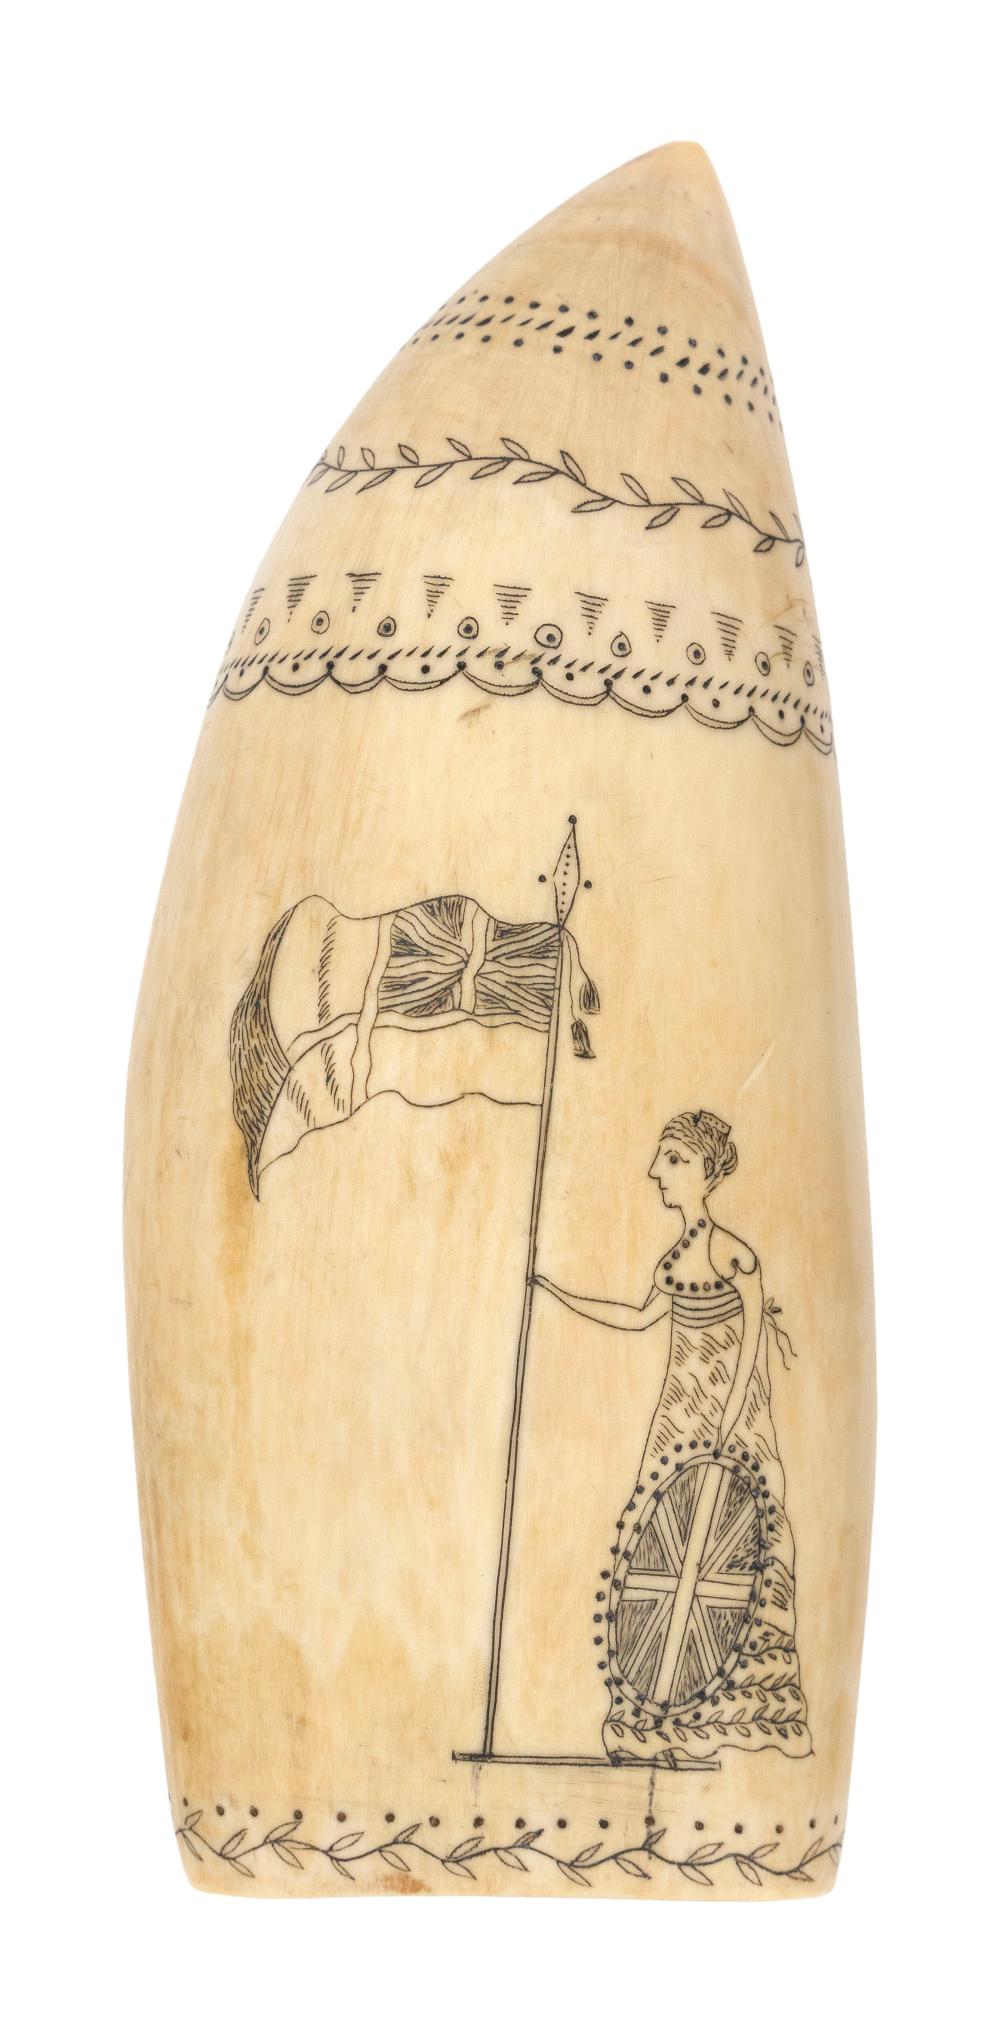 SCRIMSHAW WHALE S TOOTH DEPICTING 34f018